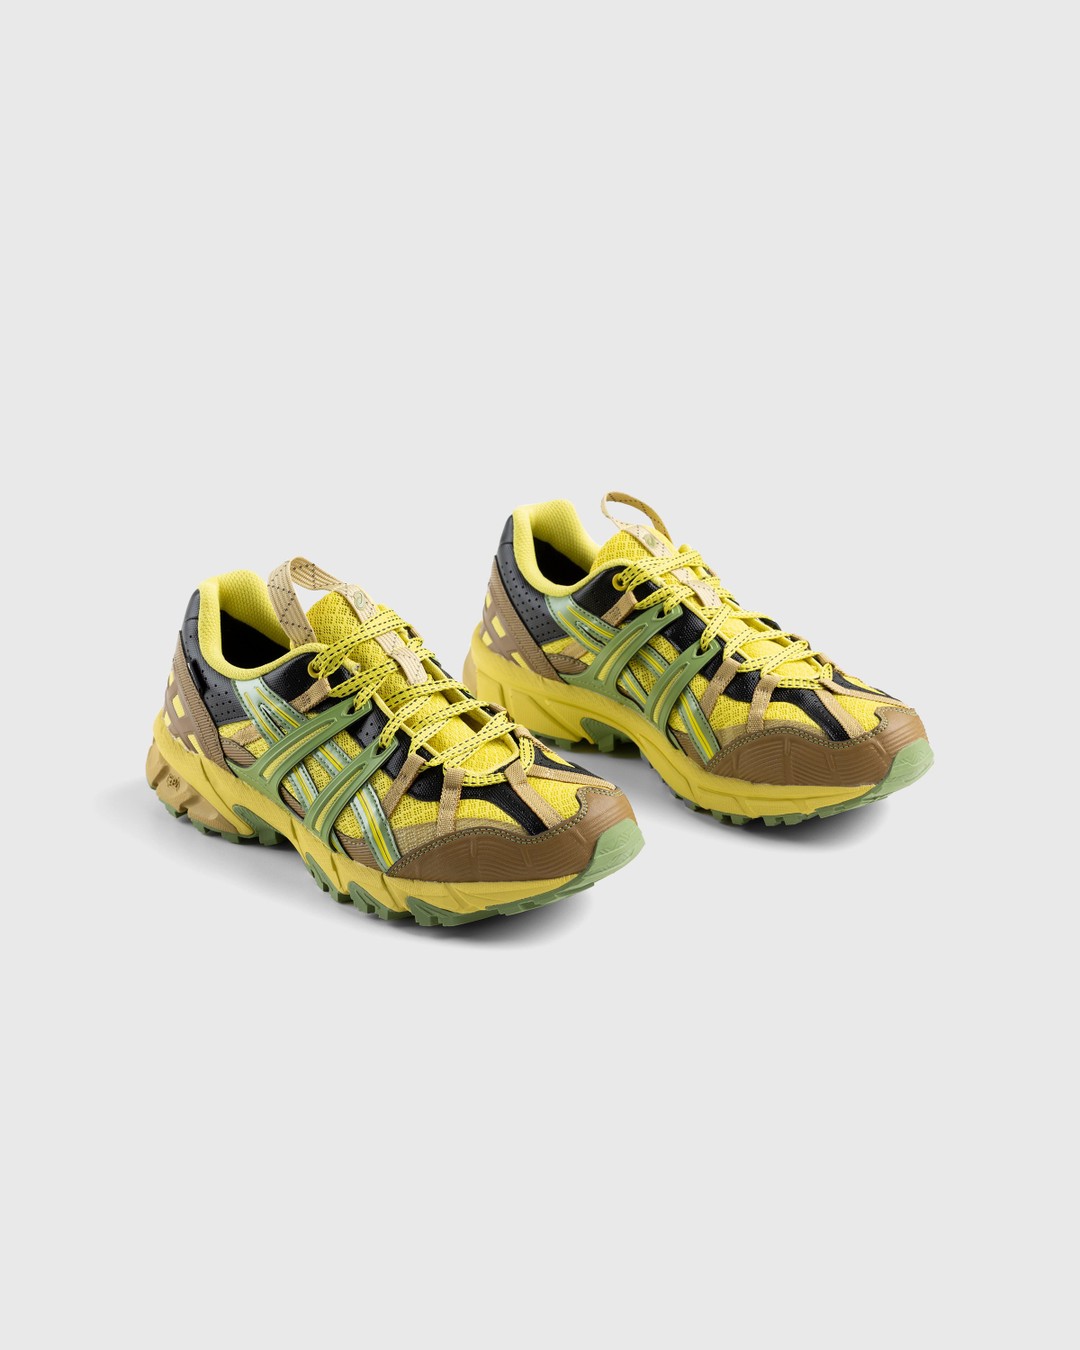 asics – HS4-S GEL-SONOMA 15-50 GTX Green Sheen/Espom - Low Top Sneakers - Yellow - Image 3